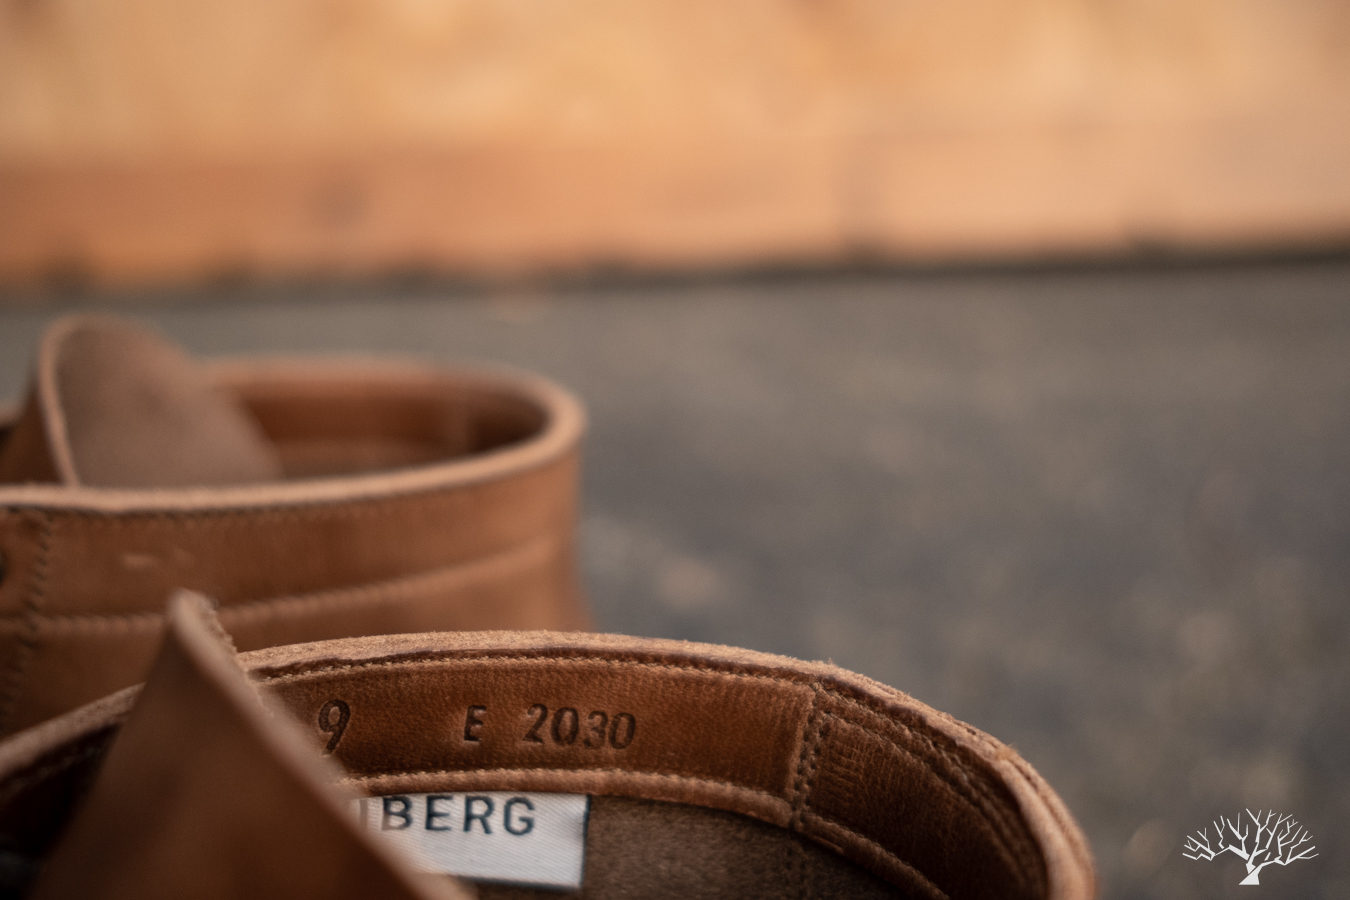 Viberg for Withered Fig Natural Chromexcel Service Boot, 2030 Last, Lactae Hevea Sole